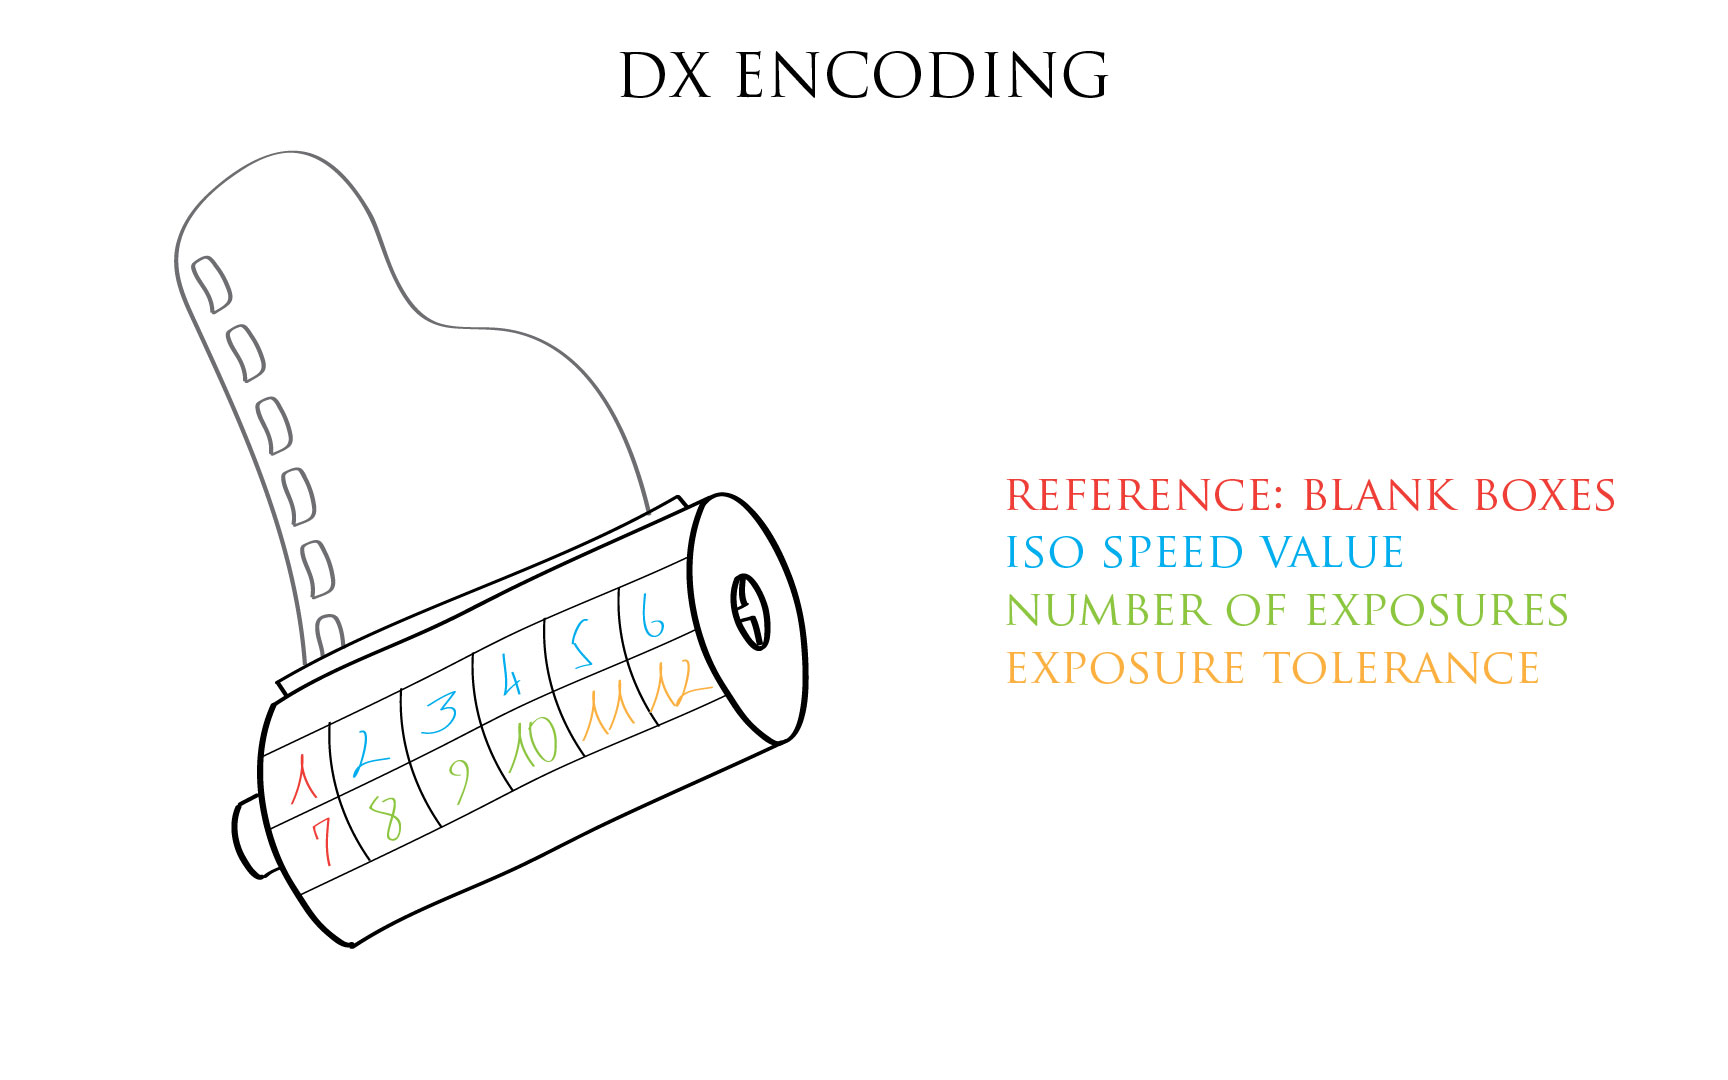 Modifying the DX code of a film